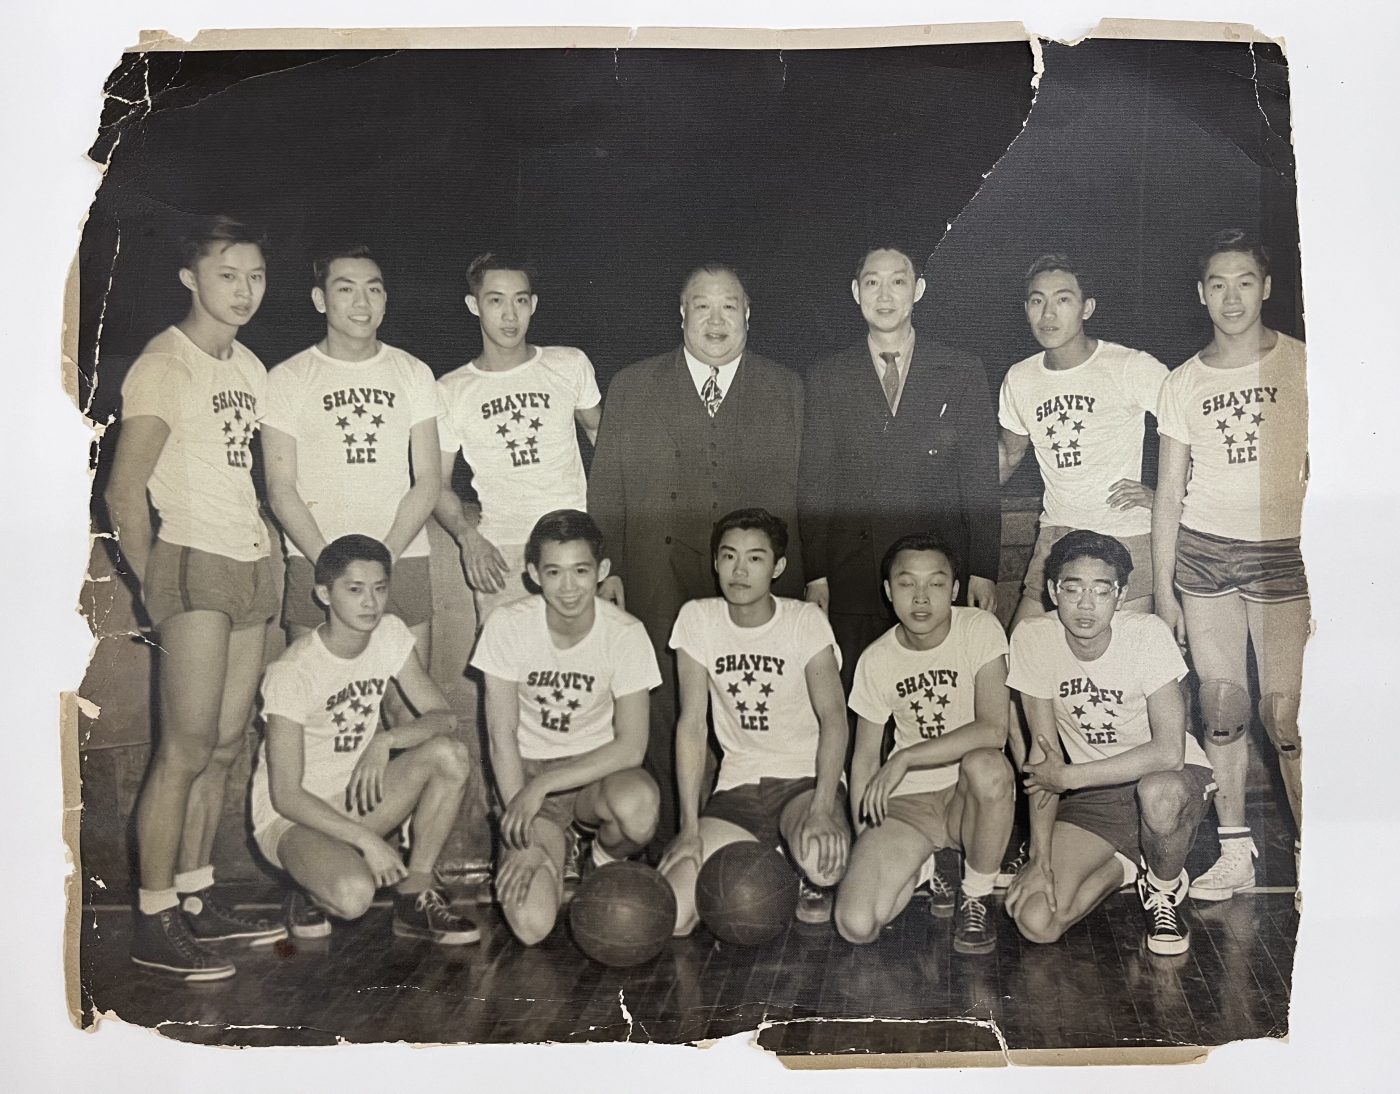 Group photo of Shavey Lee's basketball team, taken ca. 1944. Standing, from left to right are: Dory Lum, Leung Gay Lee, Stanley Chin, Shavey Lee, Lung Chin, Richard Chin, and Moody Chin. On the bottom row are: Danny Lum, Stephen Chin, Donald Chin, and Newton Chin. Museum of Chinese in America (MOCA) Collection.